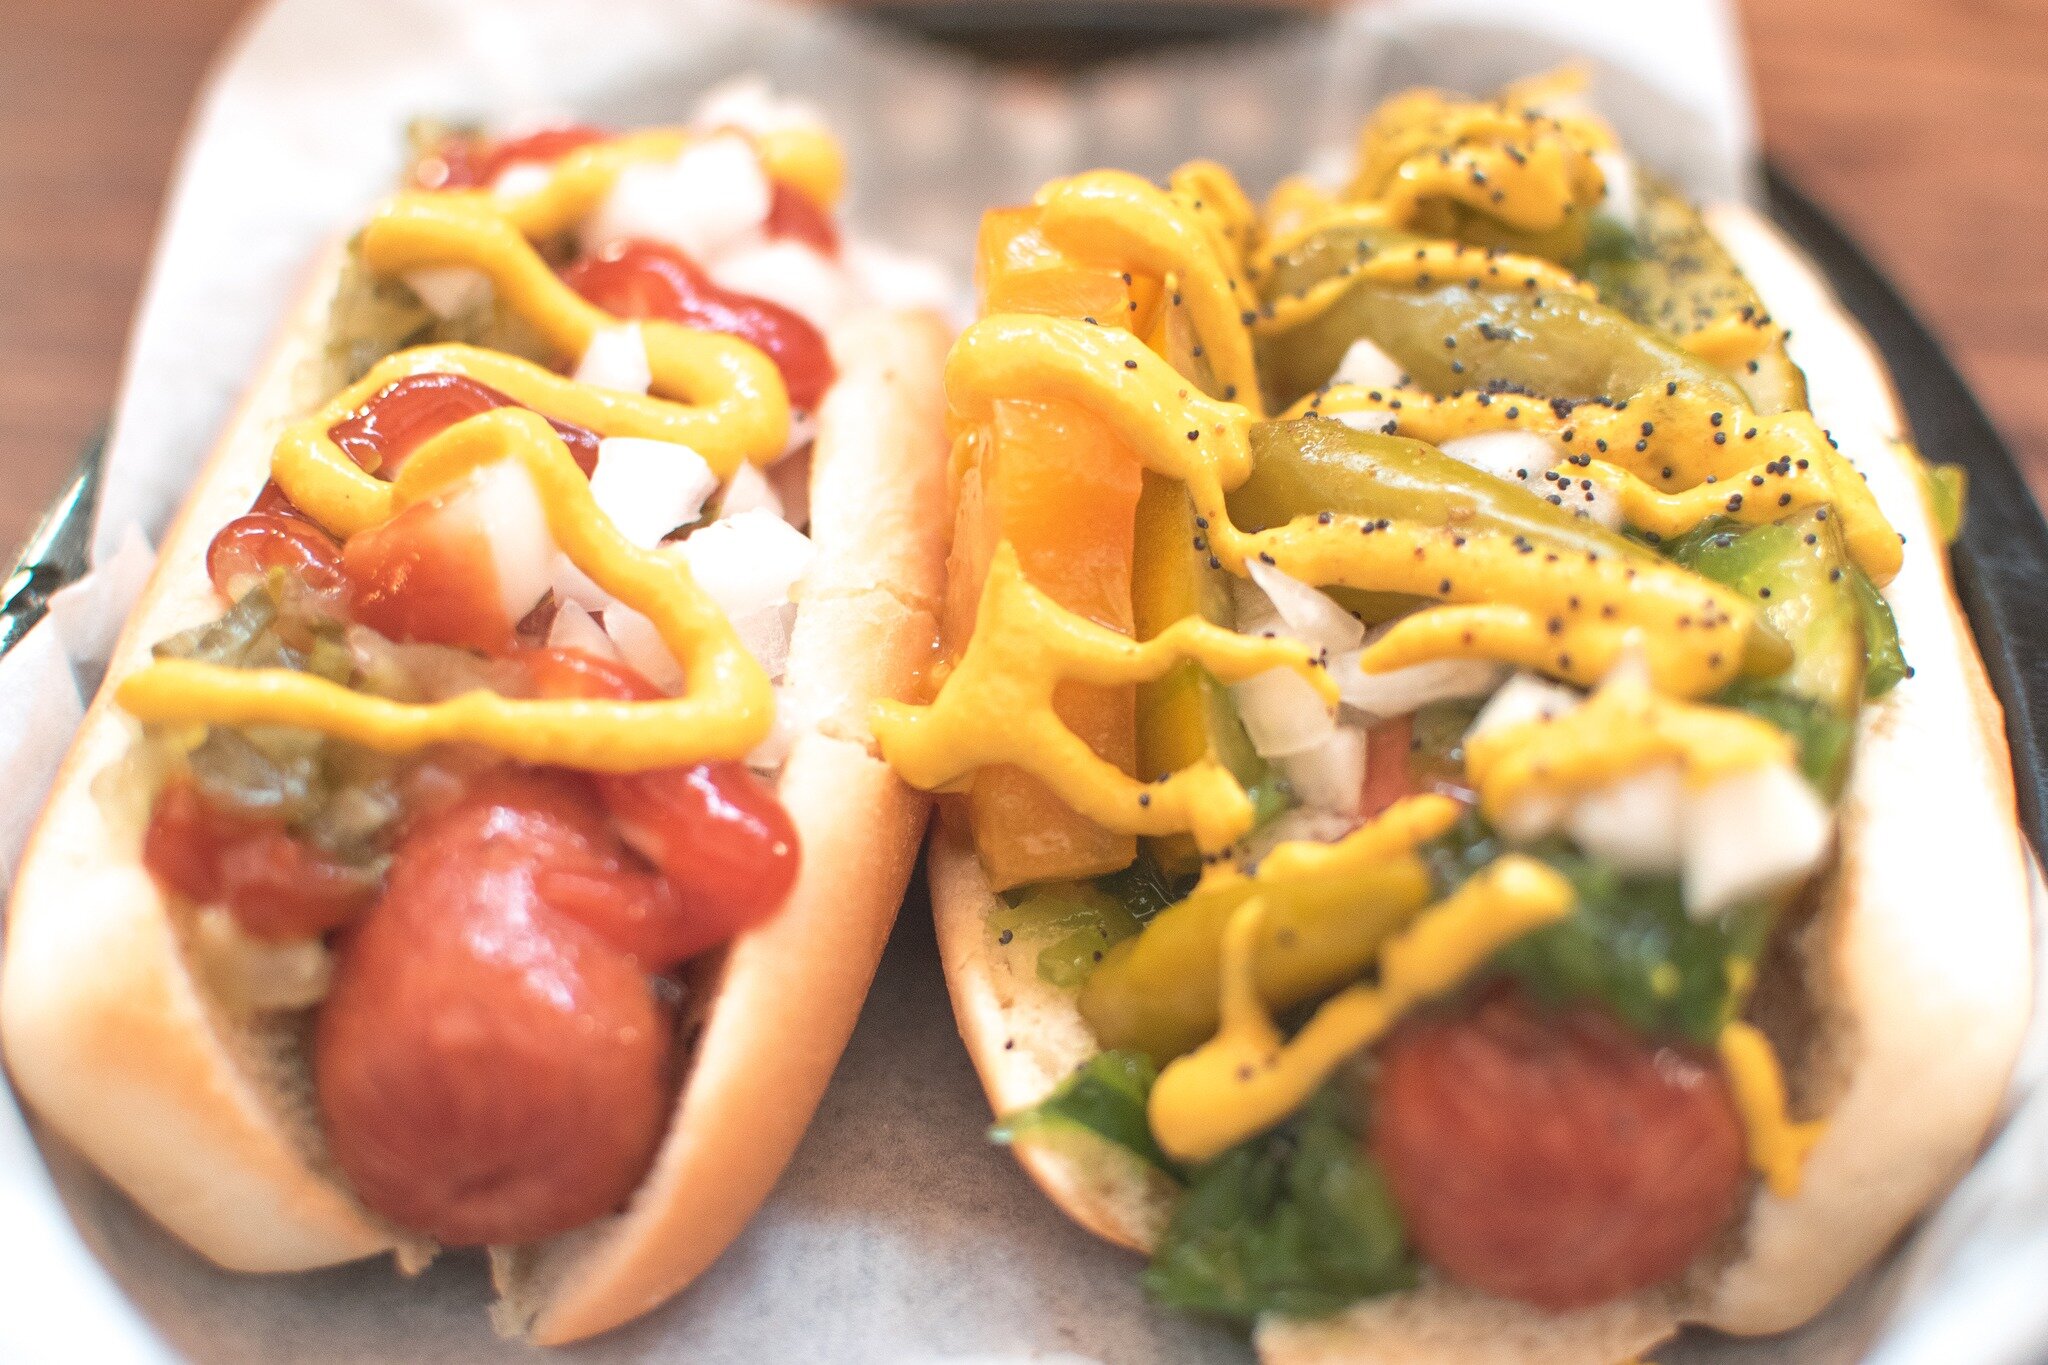 Classic vs. Chicago Dawg, one has to go FOREVER. Which one do you keep?

For good measure you should come taste test both and see which you prefer.

(Neither are leaving the menu)